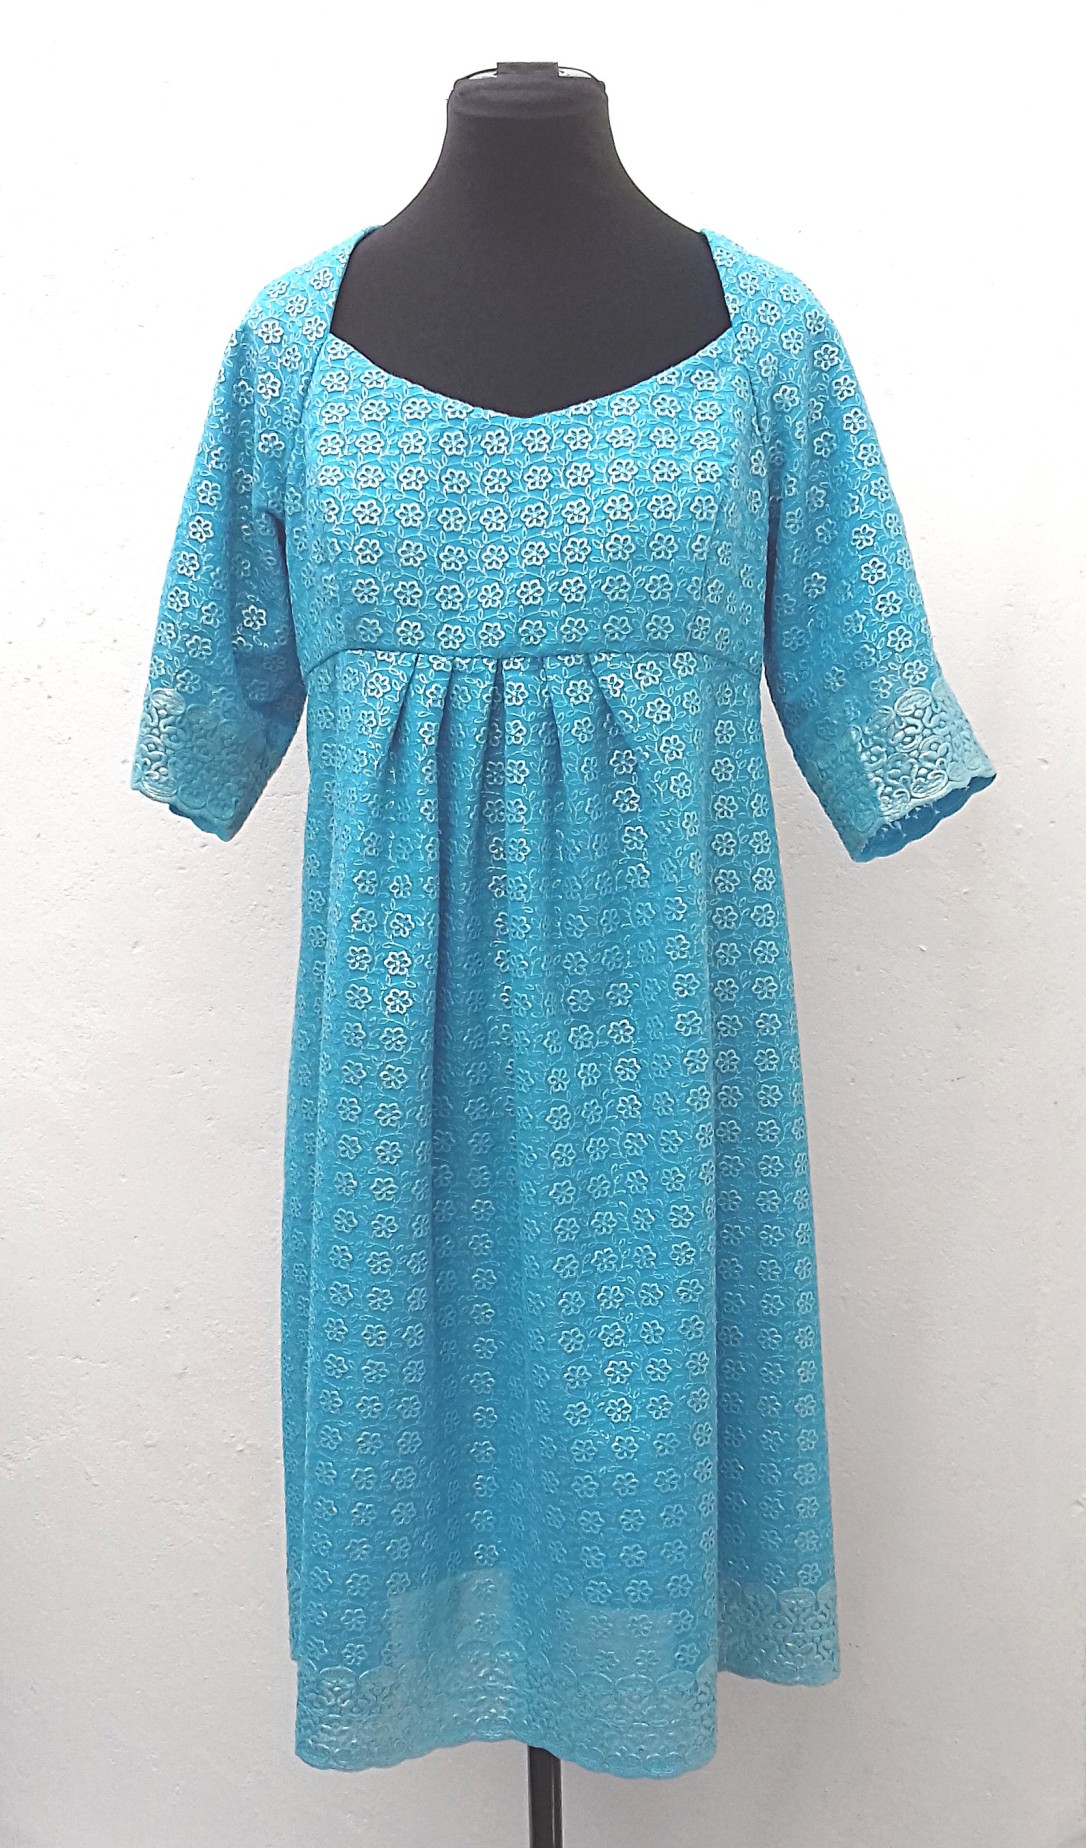 Calf-length-sky-blue-floral-embroidered-sheer-empire-line-mid-sleeved-dress